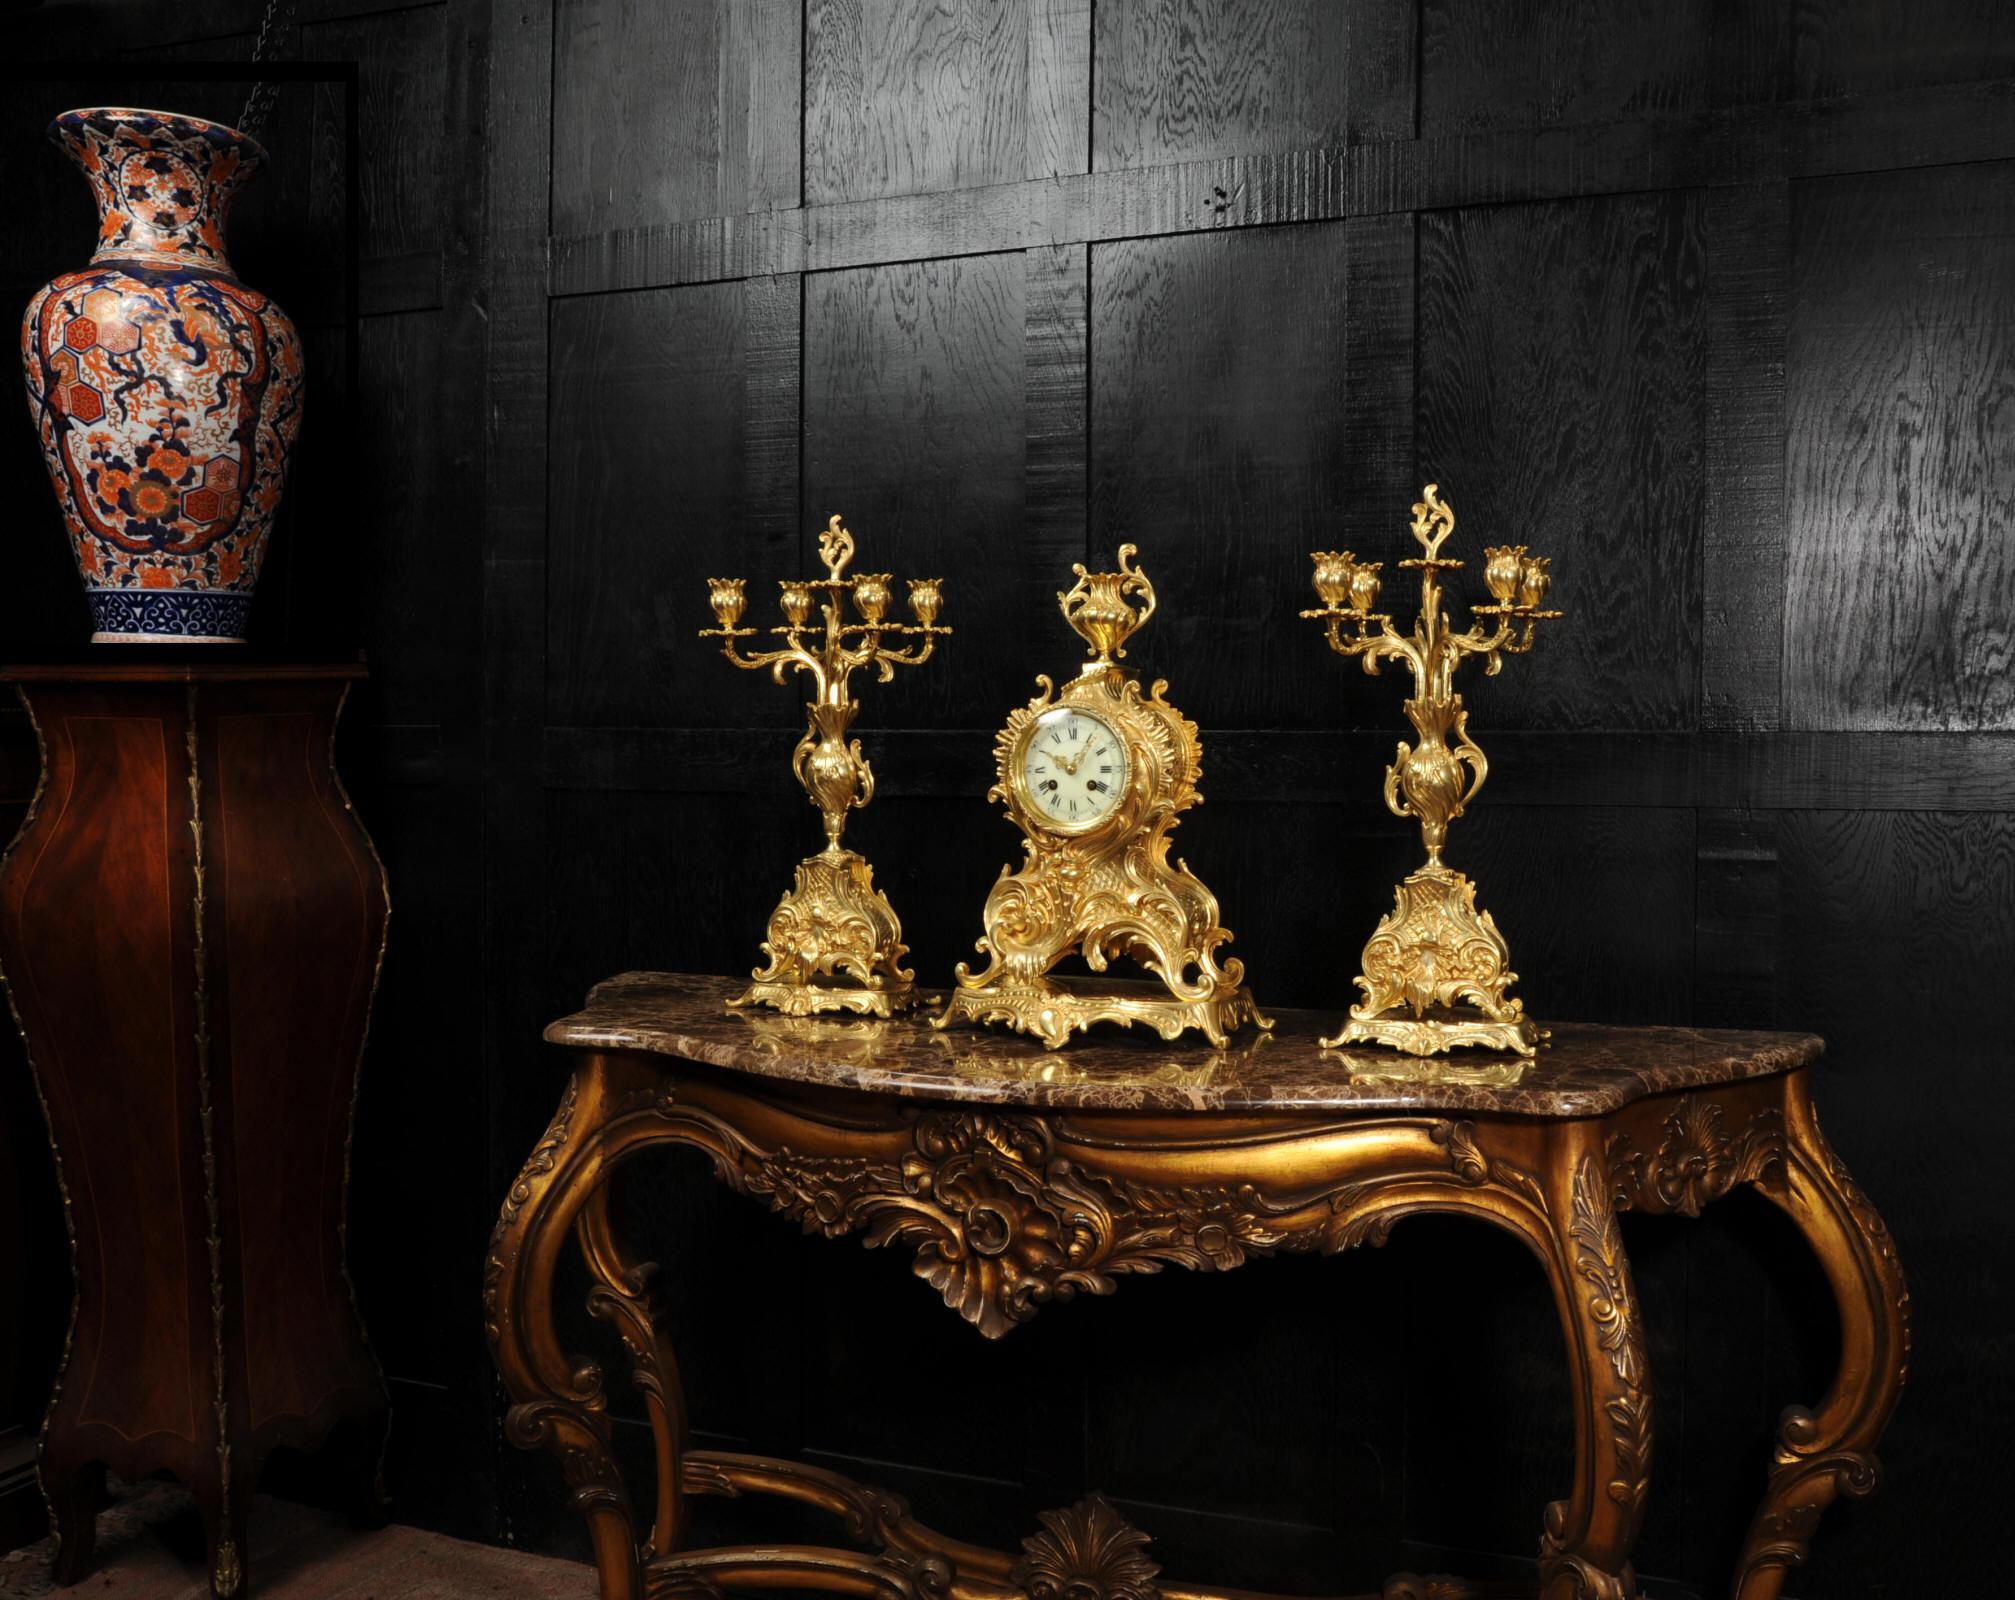 19th Century Large Antique French Rococo Gilt Bronze Candelabra Clock Set For Sale